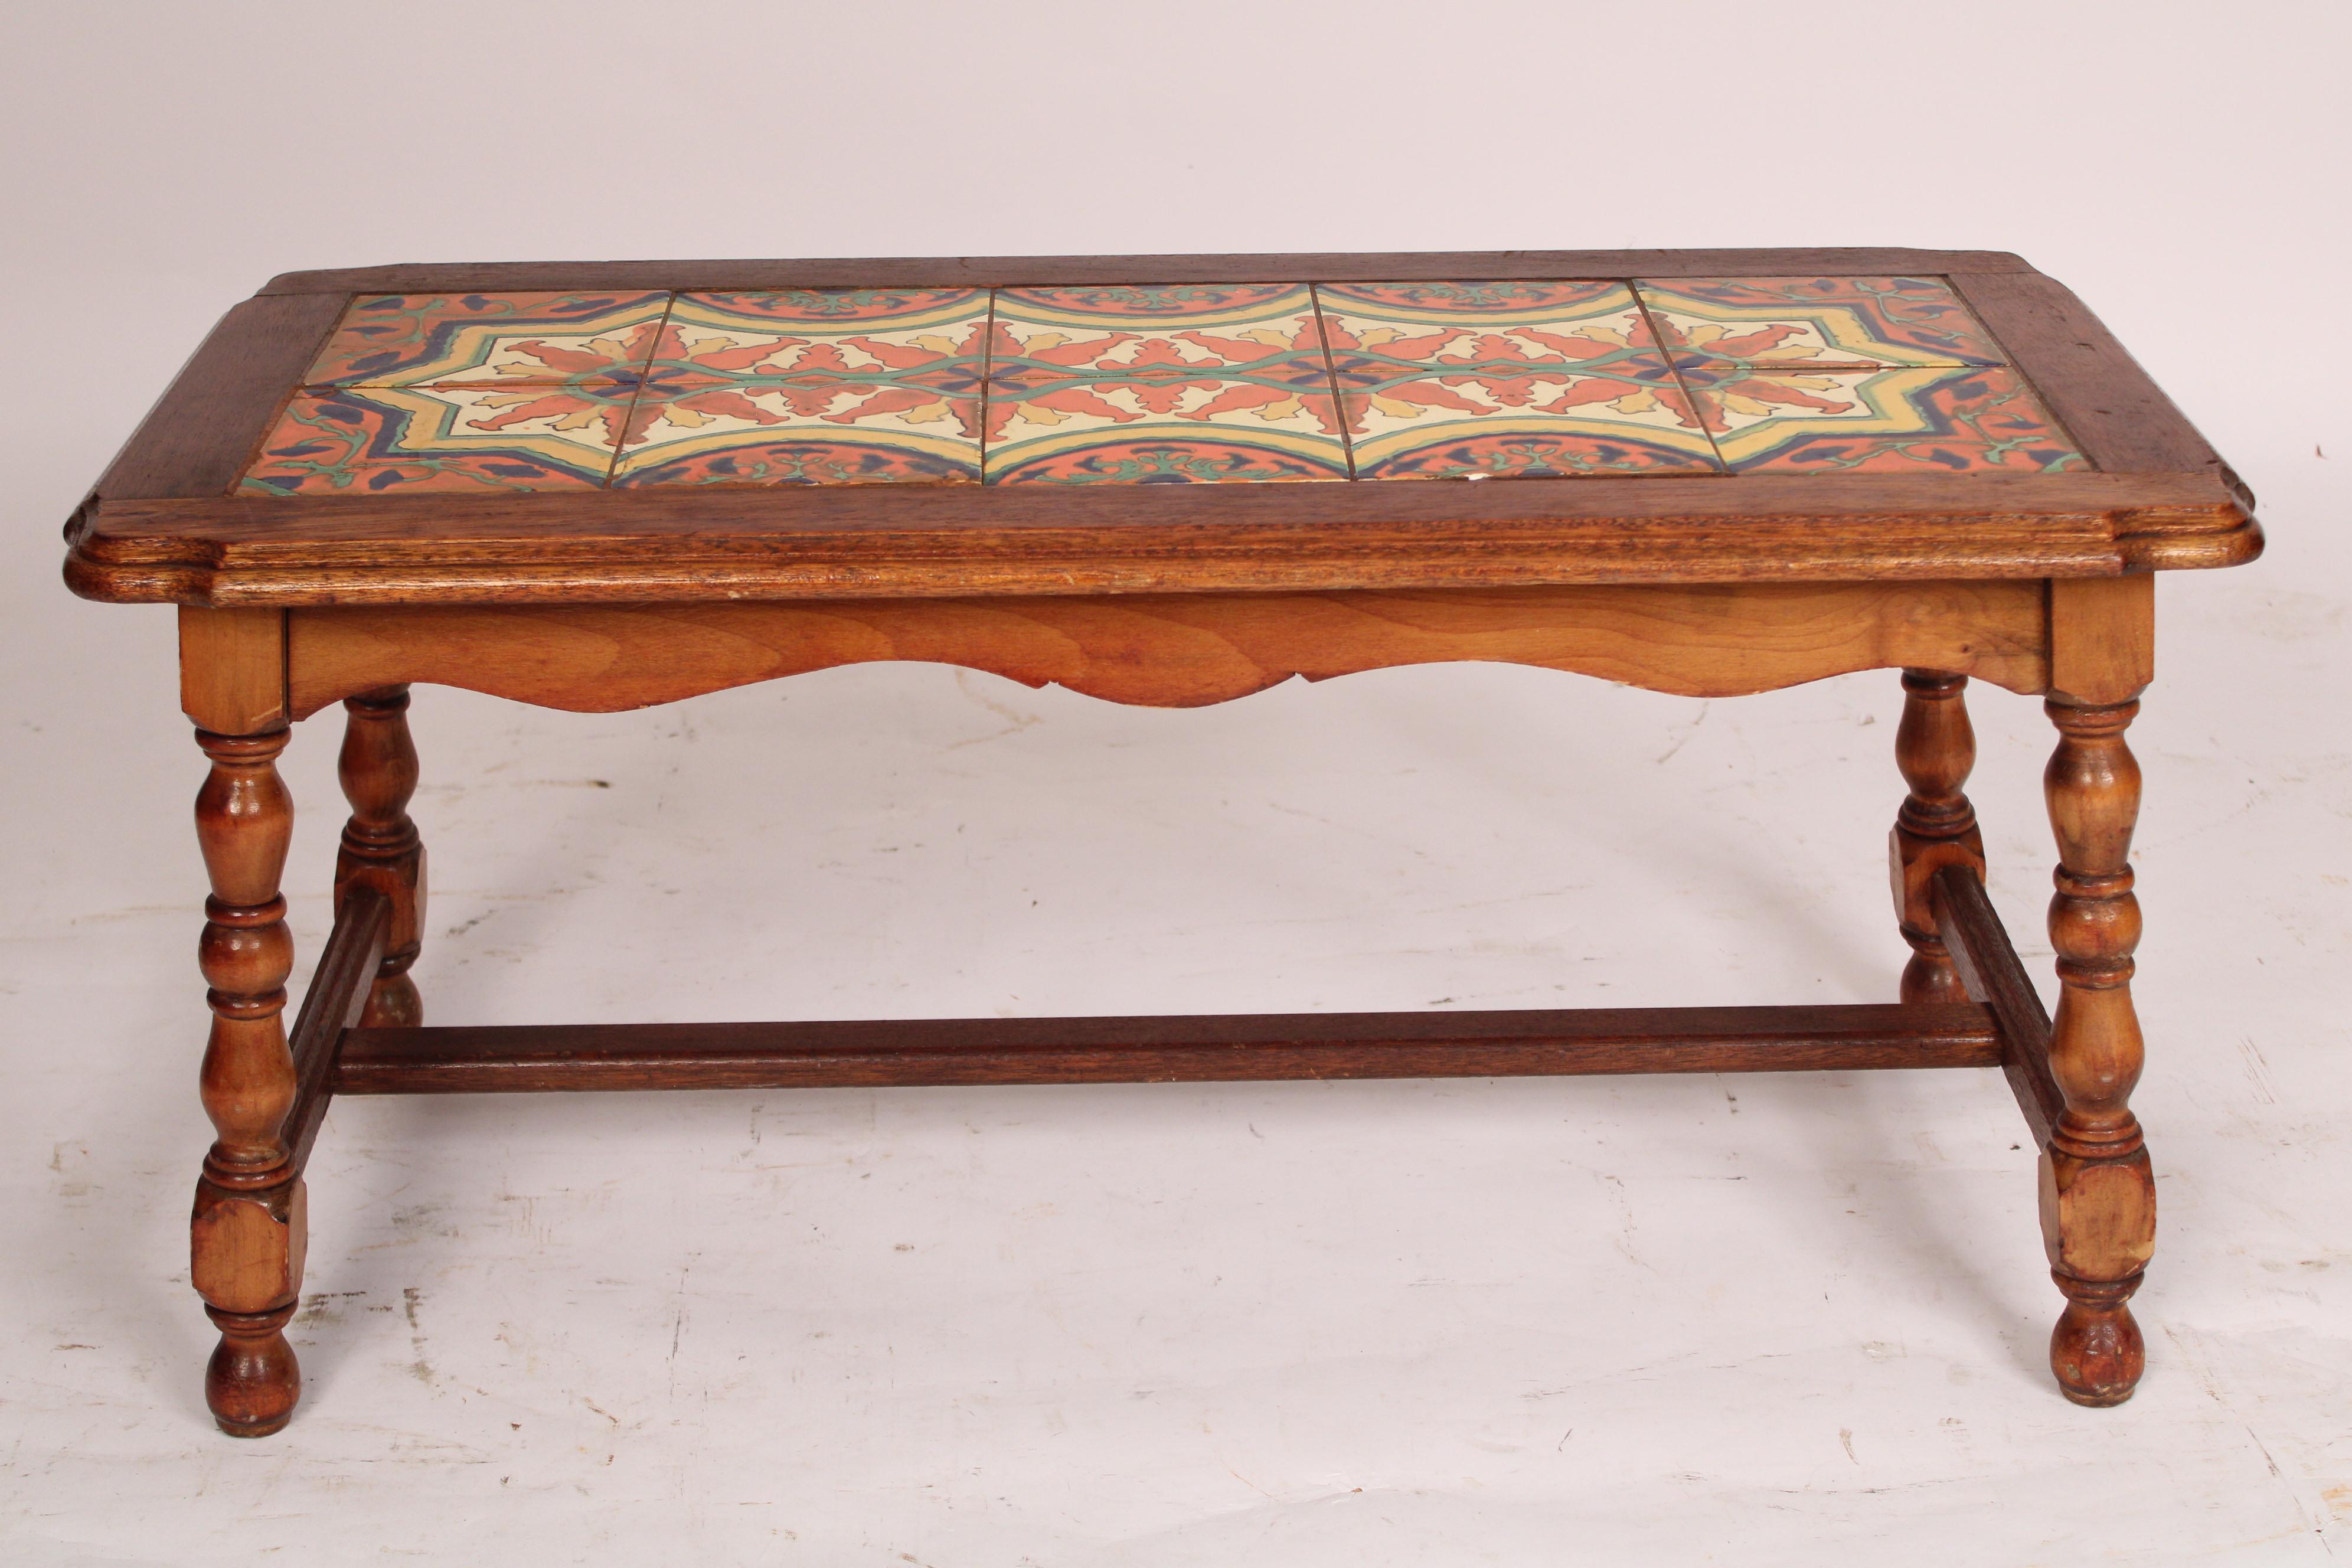 Spanish style oak coffee table with a tile top, circa 1930's. The top with an oak overhanging top inset with 10 colorful tiles, a scalloped apron, turned oak legs joined by an H shaped stretcher bar.